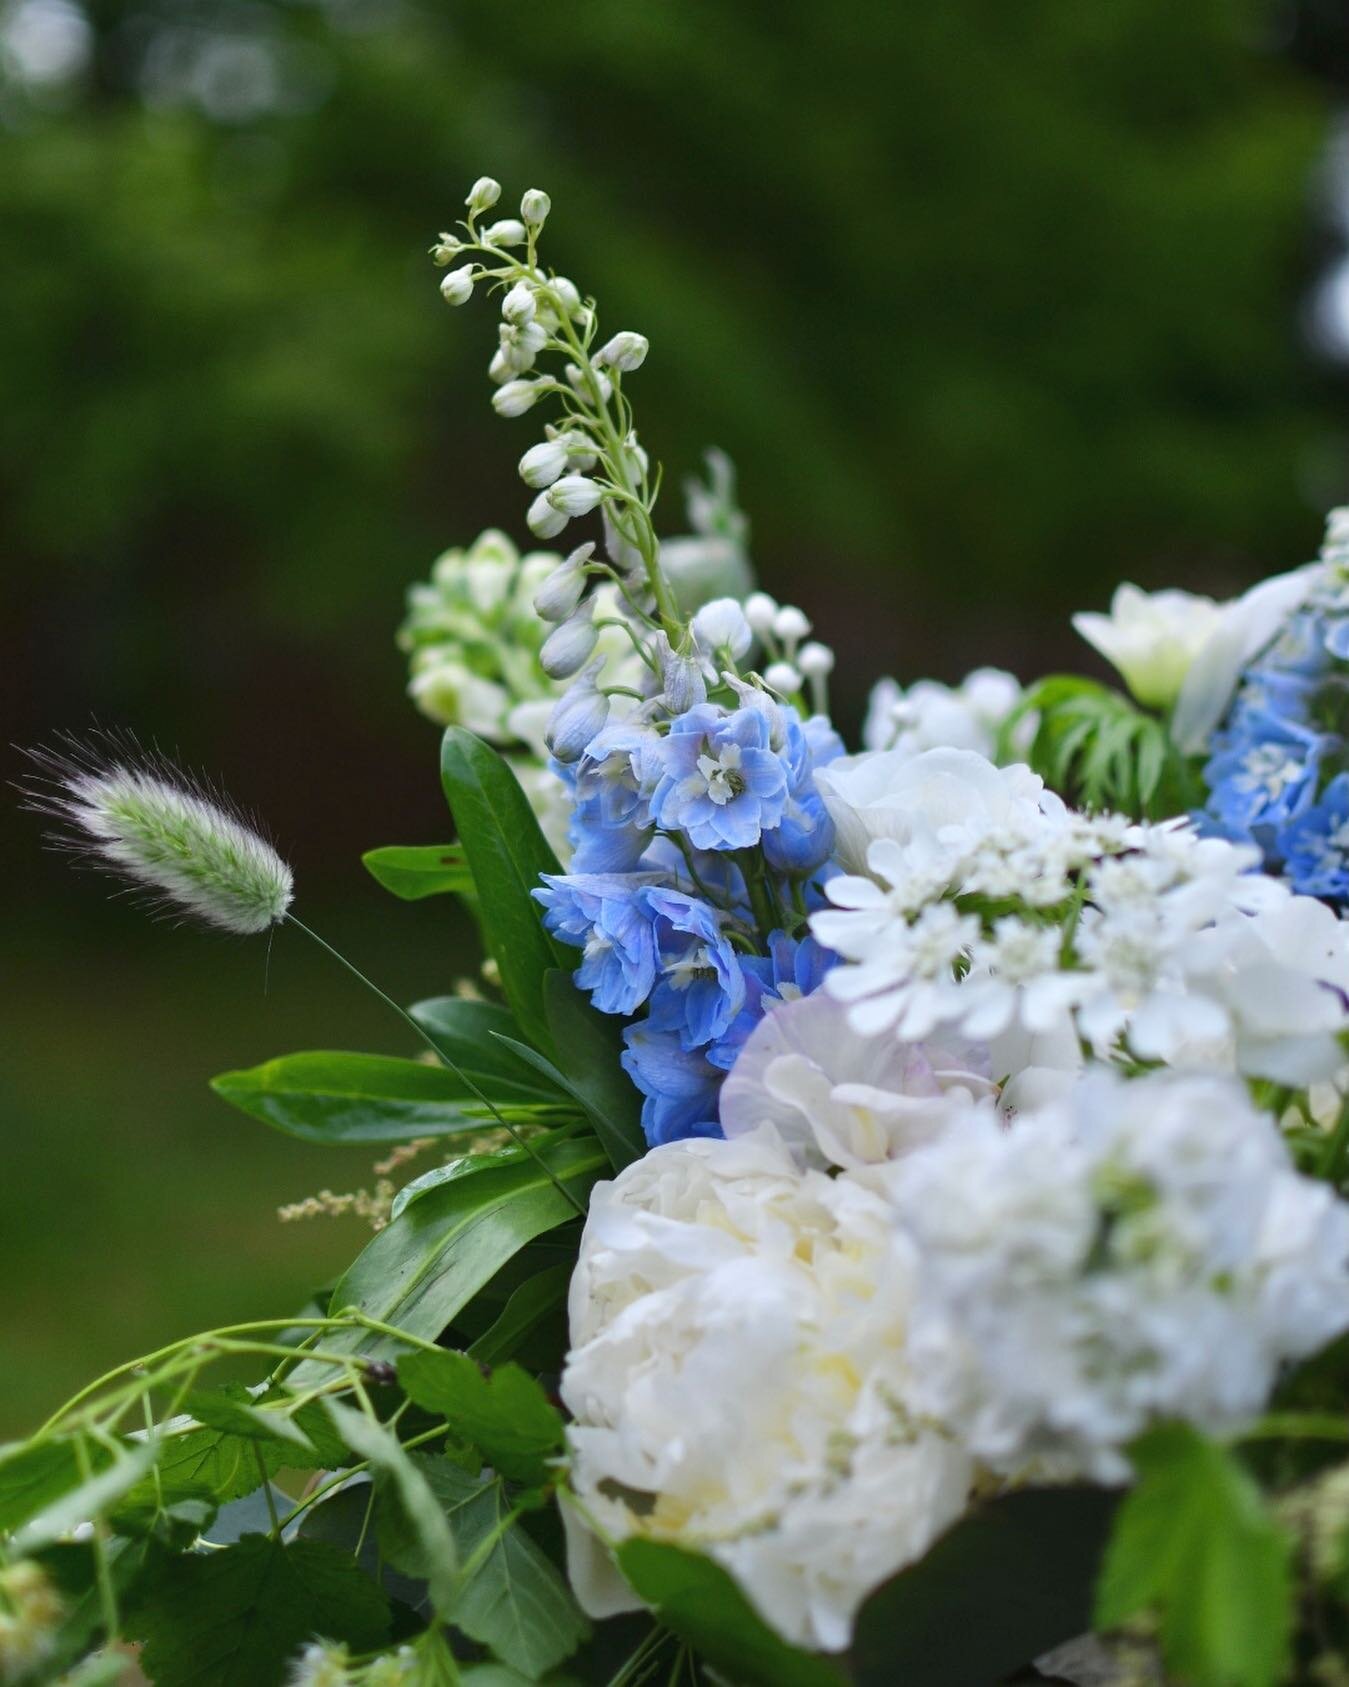 Blue is one of the more rare colors to come by in the flower world. I grow a few other true blue flowers, but when I think of blue the first flower that always comes to my mind are delphinium. The pale ice blue color of these amazing flowers are so s